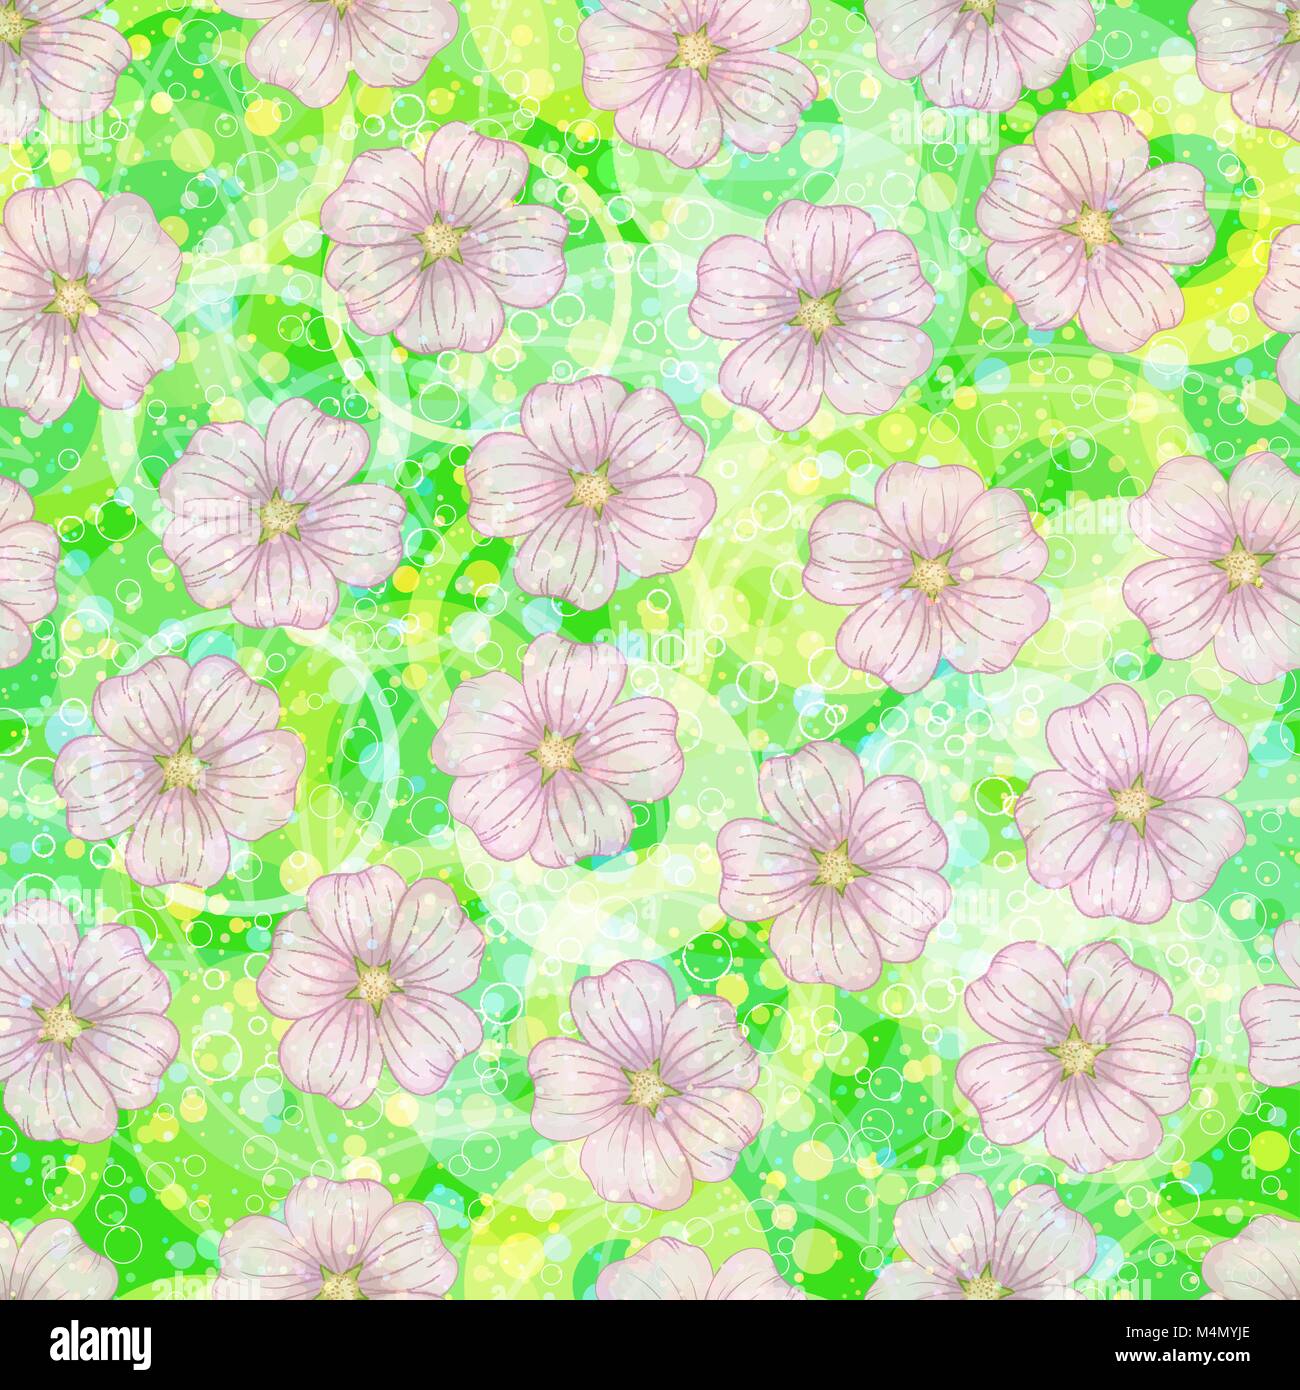 Seamless Floral Pattern, Mallow Stock Vector